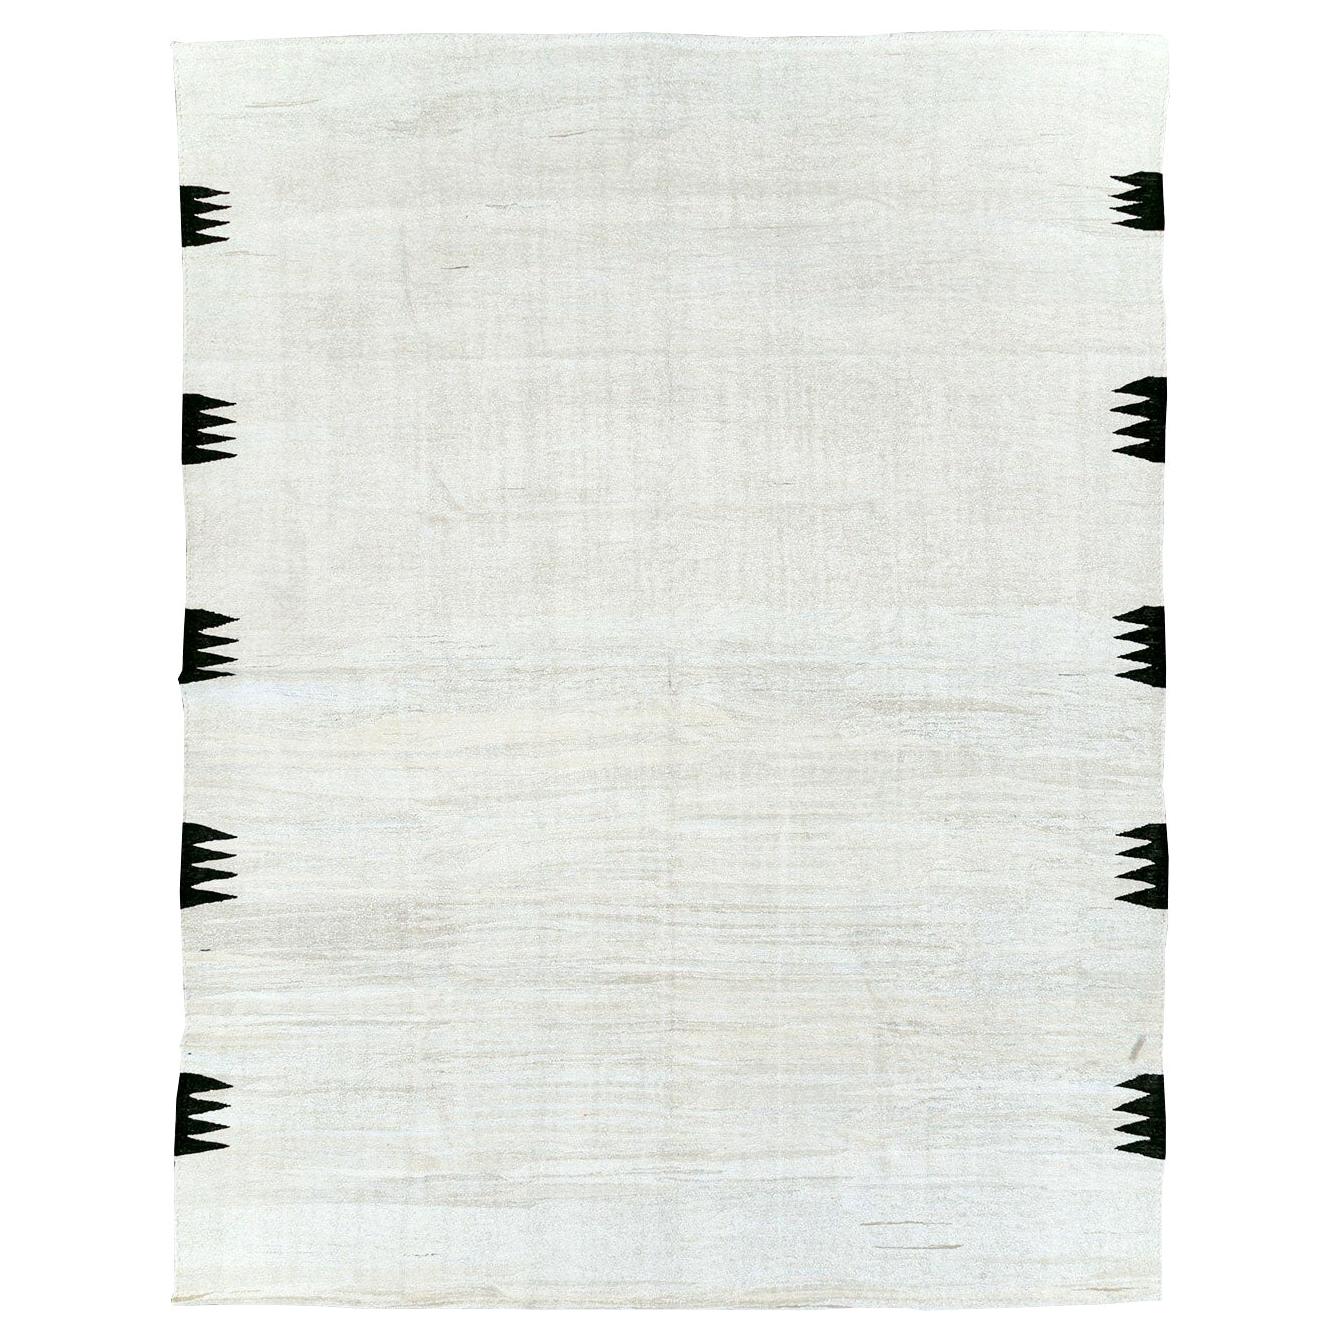 Bauhaus Contemporary Turkish Flatweave Kilim Room Size Carpet in White and Black For Sale